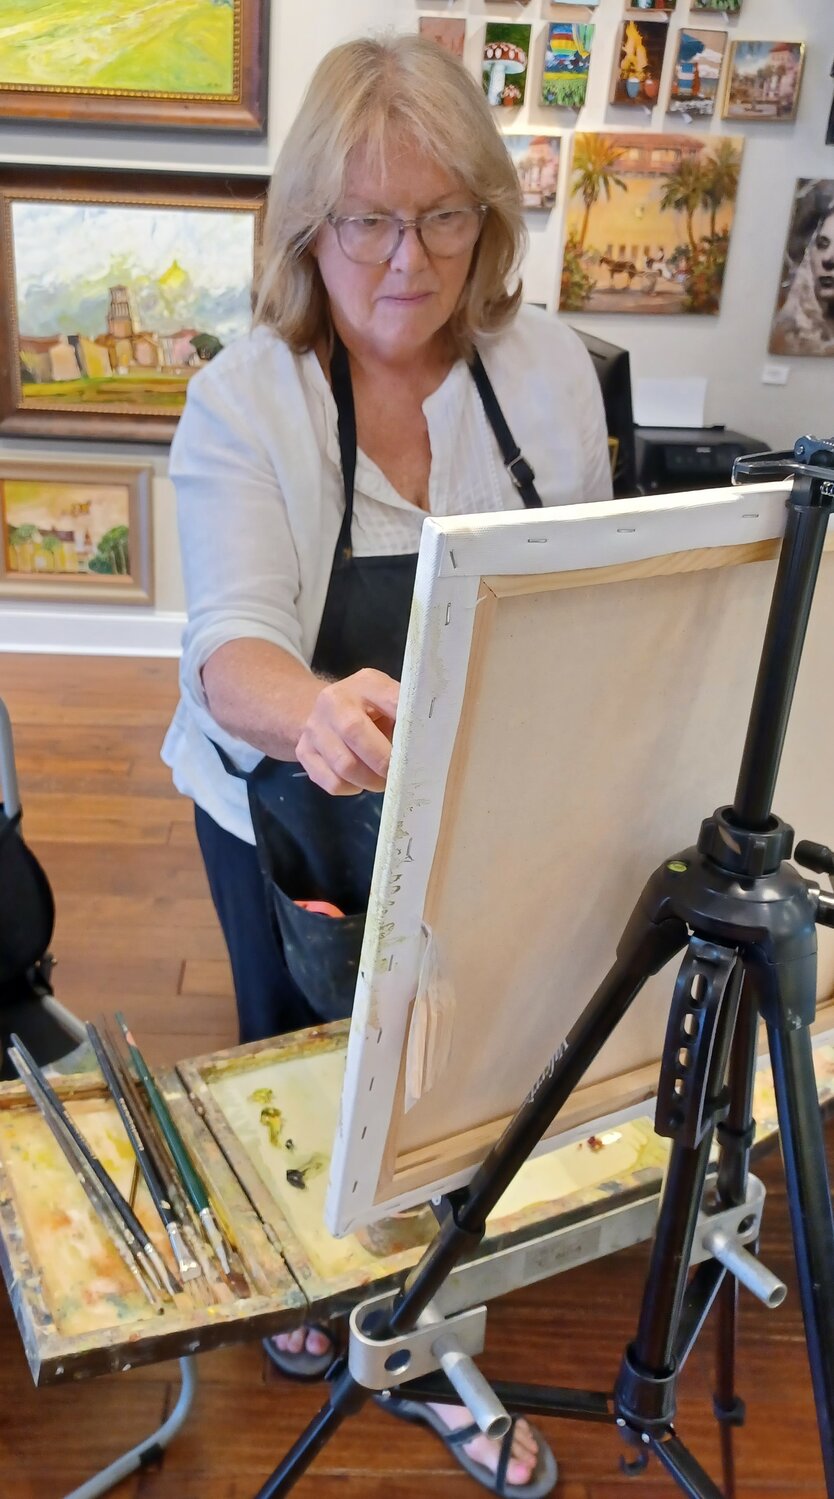 Martha Ferguson does a painting live during a special event at The Grand Bohemian Galley.